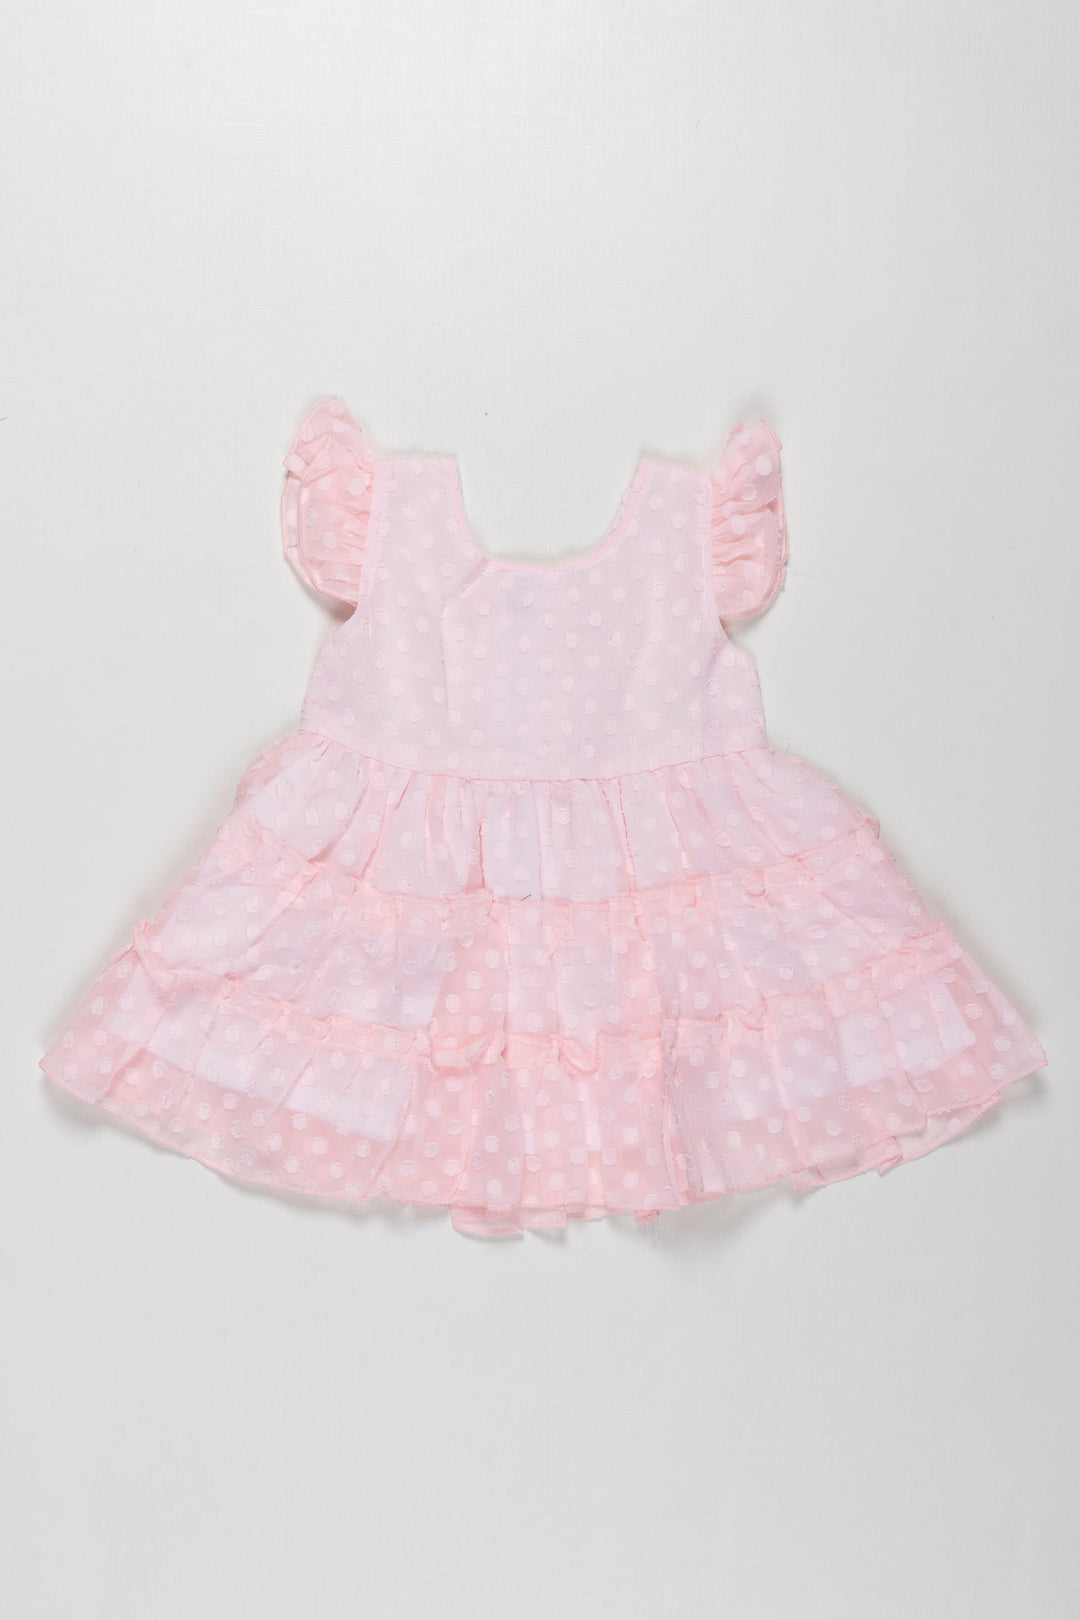 The Nesavu Baby Fancy Frock Whisper Pink Tulle Baby Frock with Polka Accents - Angelic Charm Nesavu 14 (6M) / Pink / Georgette BFJ528A-14 Soft Pink Polka Dot Infant Dress | Comfy & Fashionable Baby Party Wear | The Nesavu